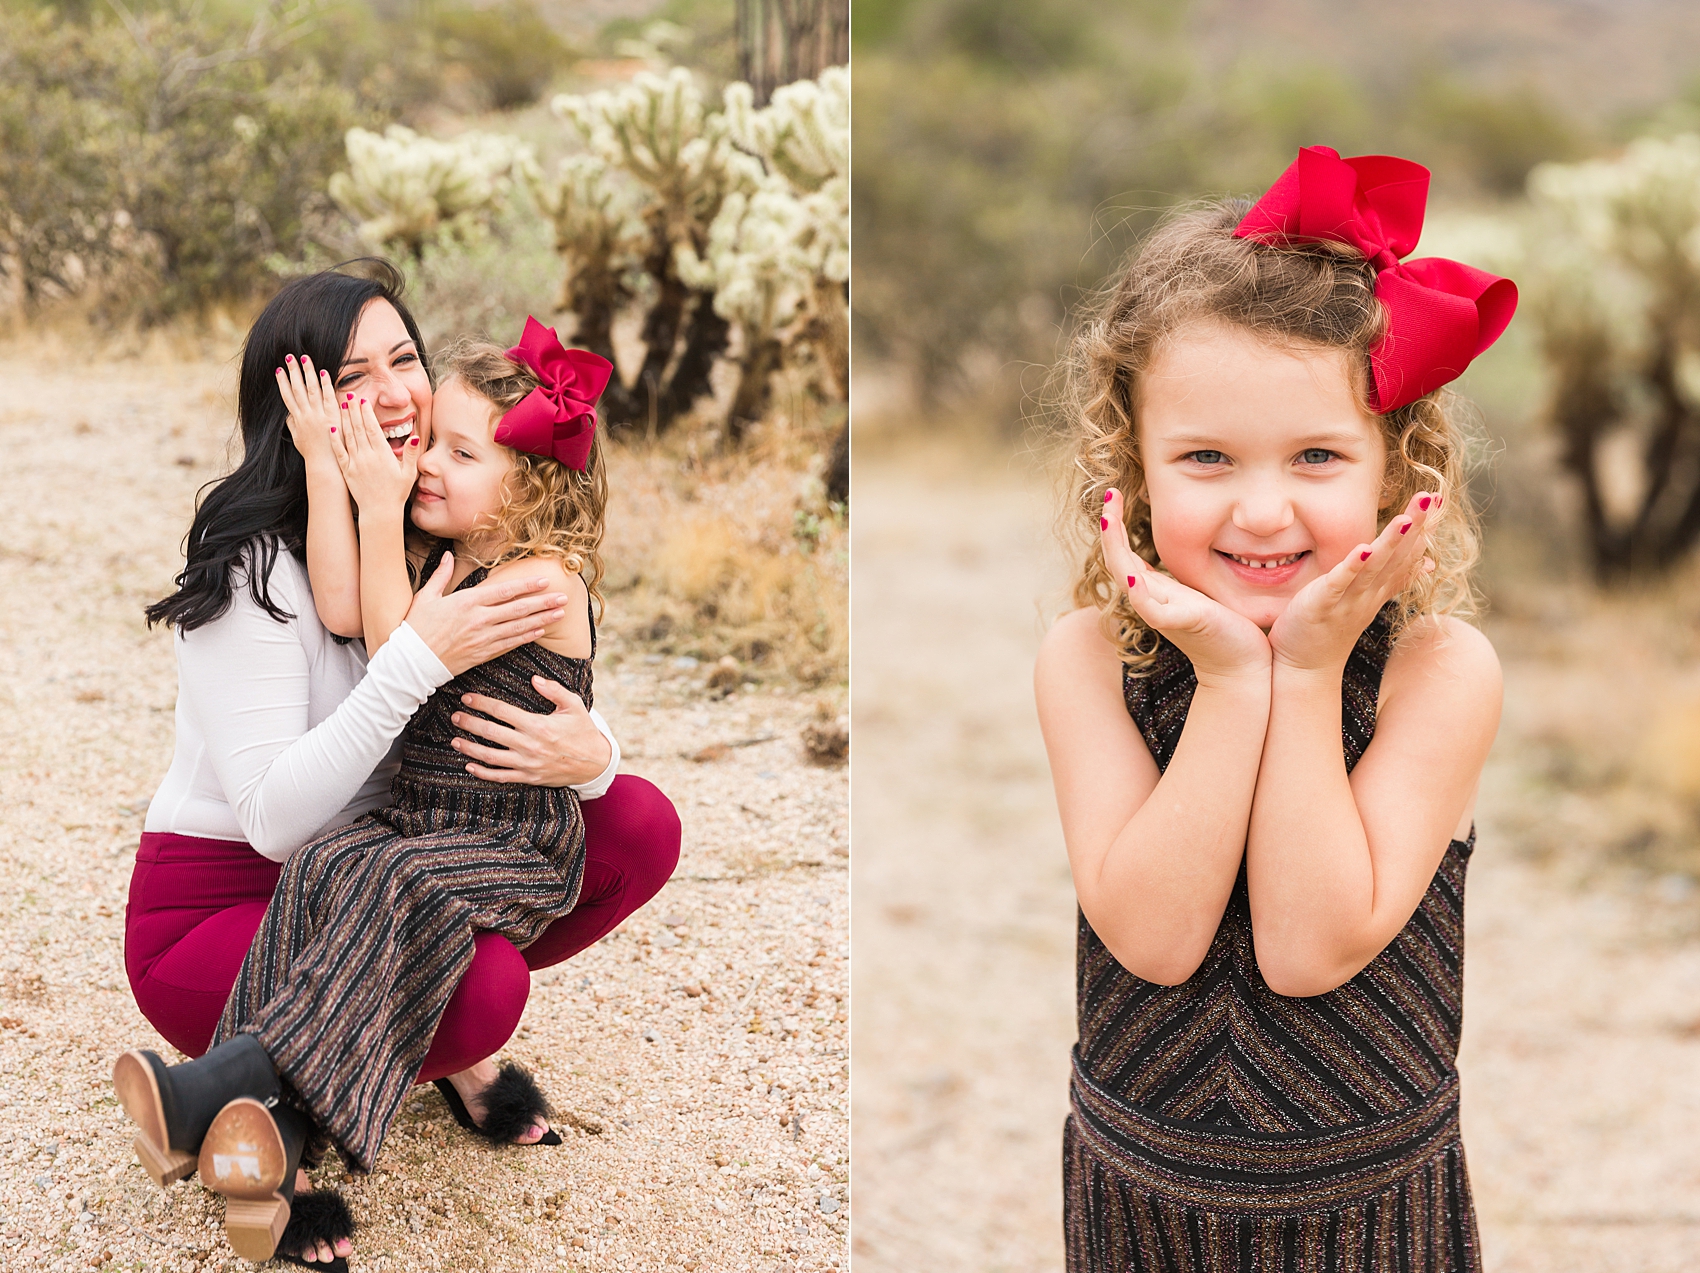 Leah Hope Photography | Scottsdale Phoenix Arizona | Desert Landscape Cactus Mountains Scenery | Extended Family Photos | Family Pictures | Family Poses | What to Wear